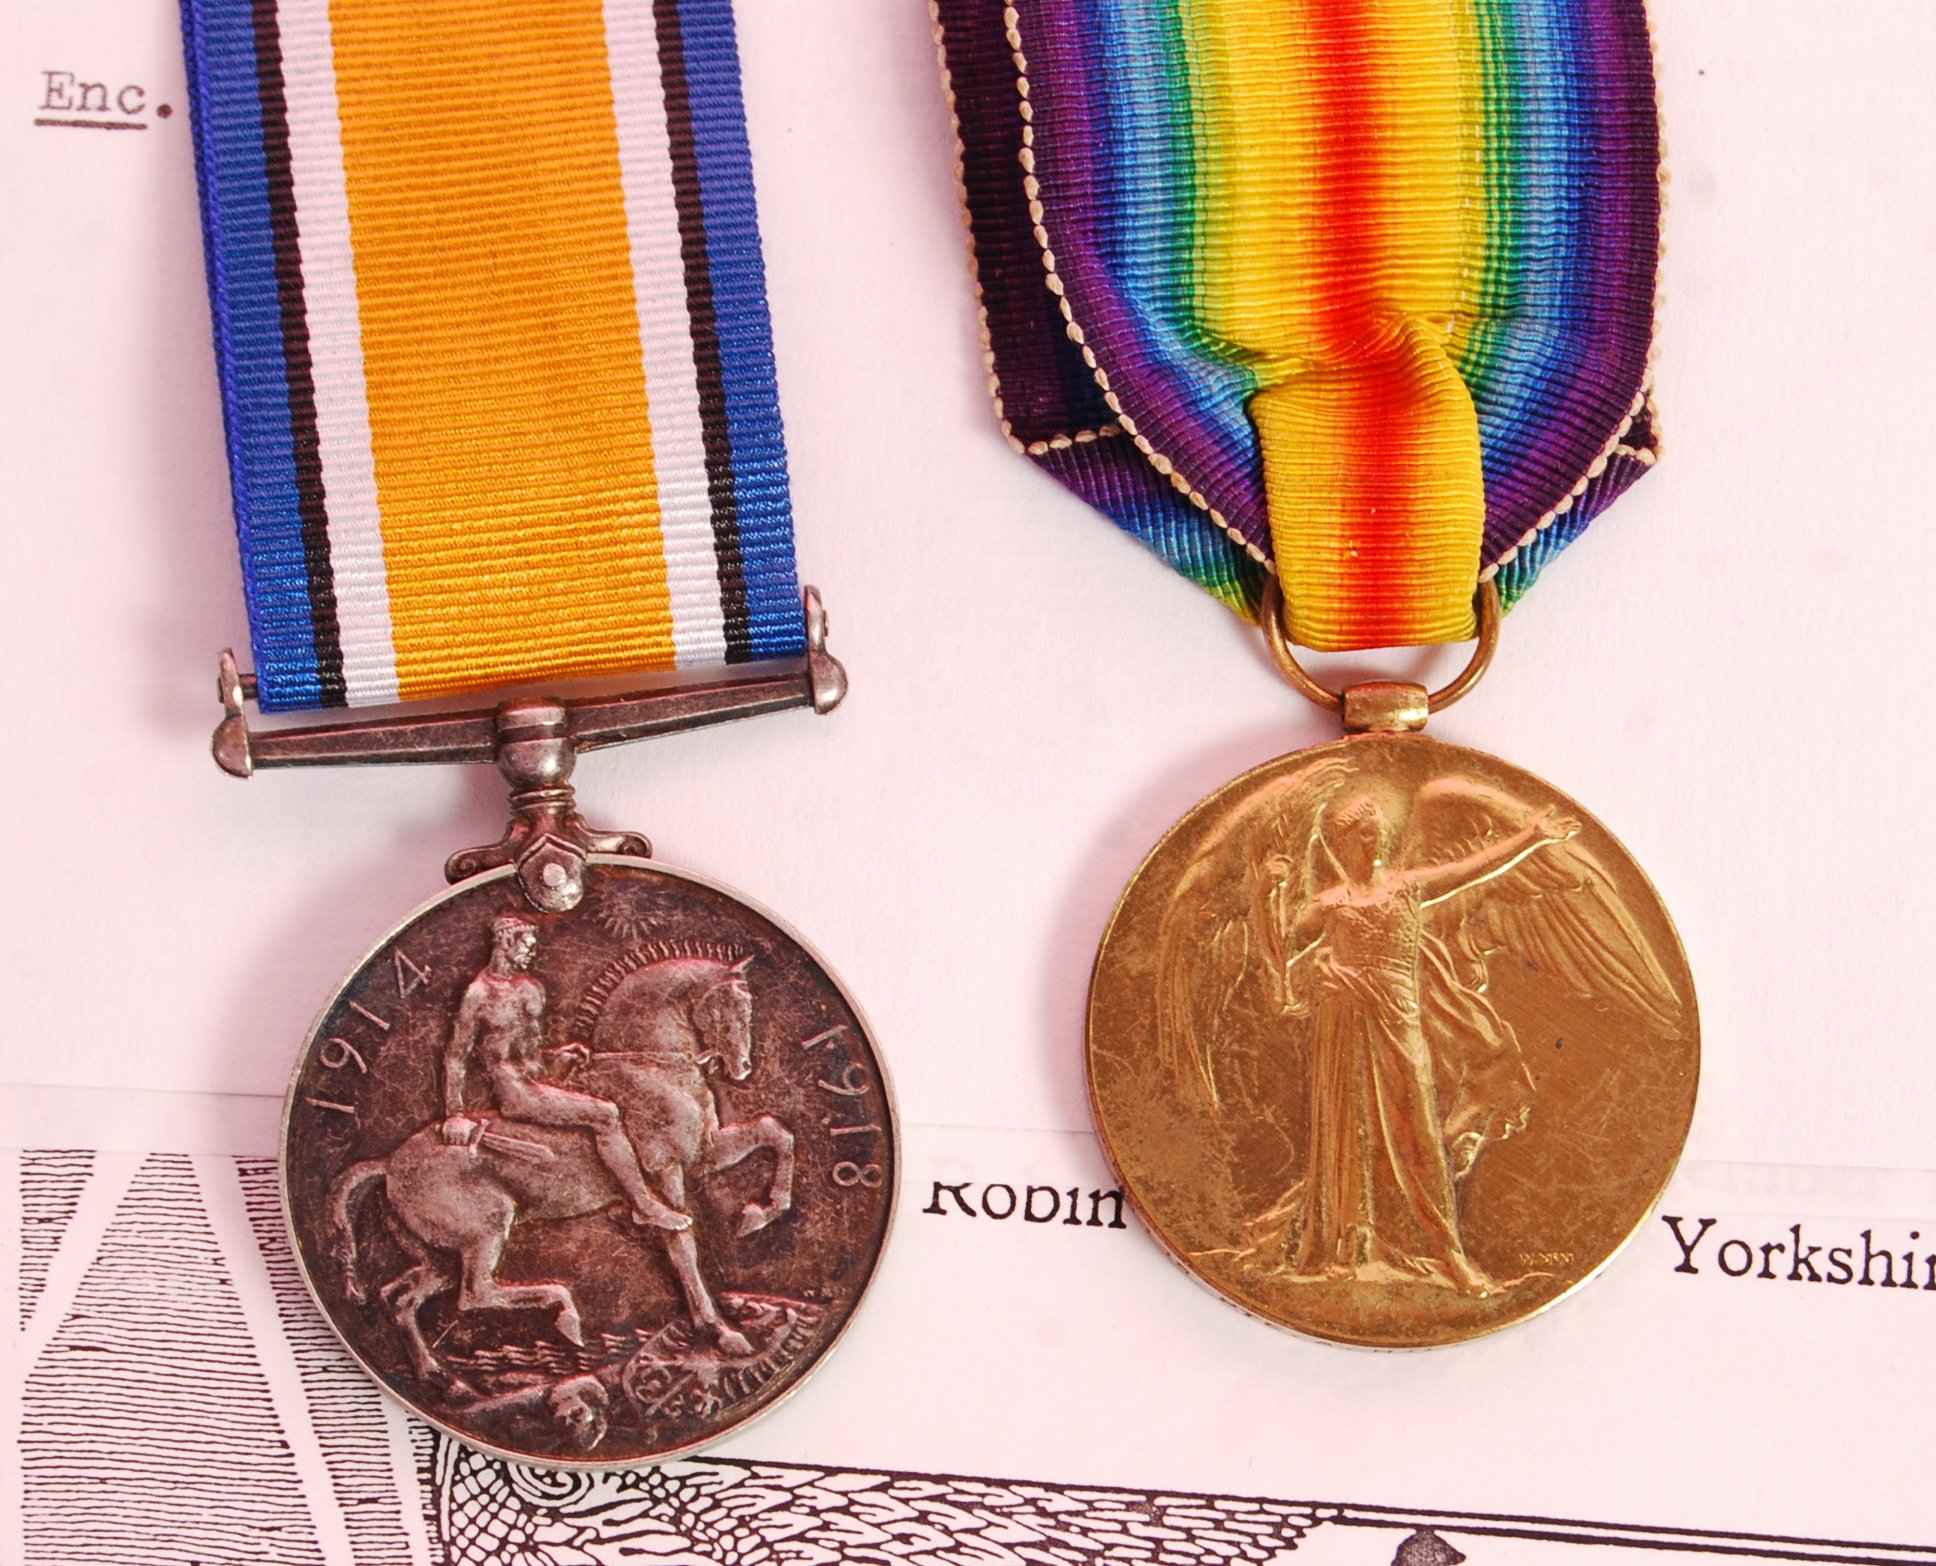 WWI FIRST WORLD WAR MEDAL PAIR - ROYAL INNISKILLING FUSILIERS - KIA - Image 2 of 6